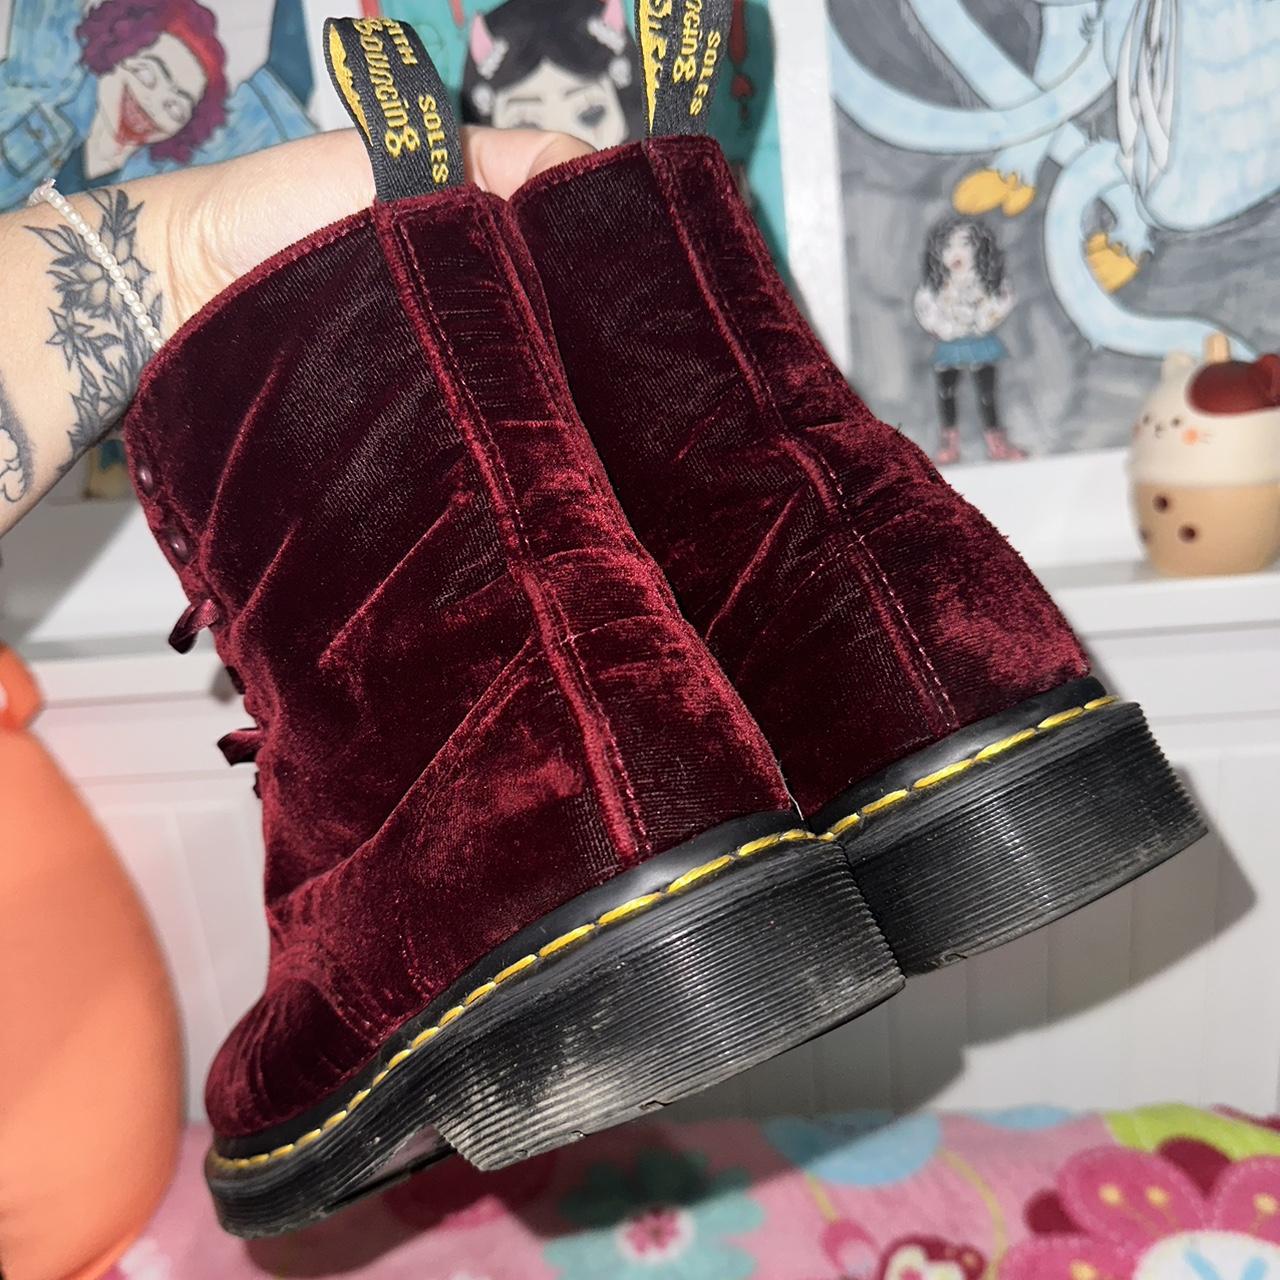 Dr. Martens Women's Red and Black Boots (2)